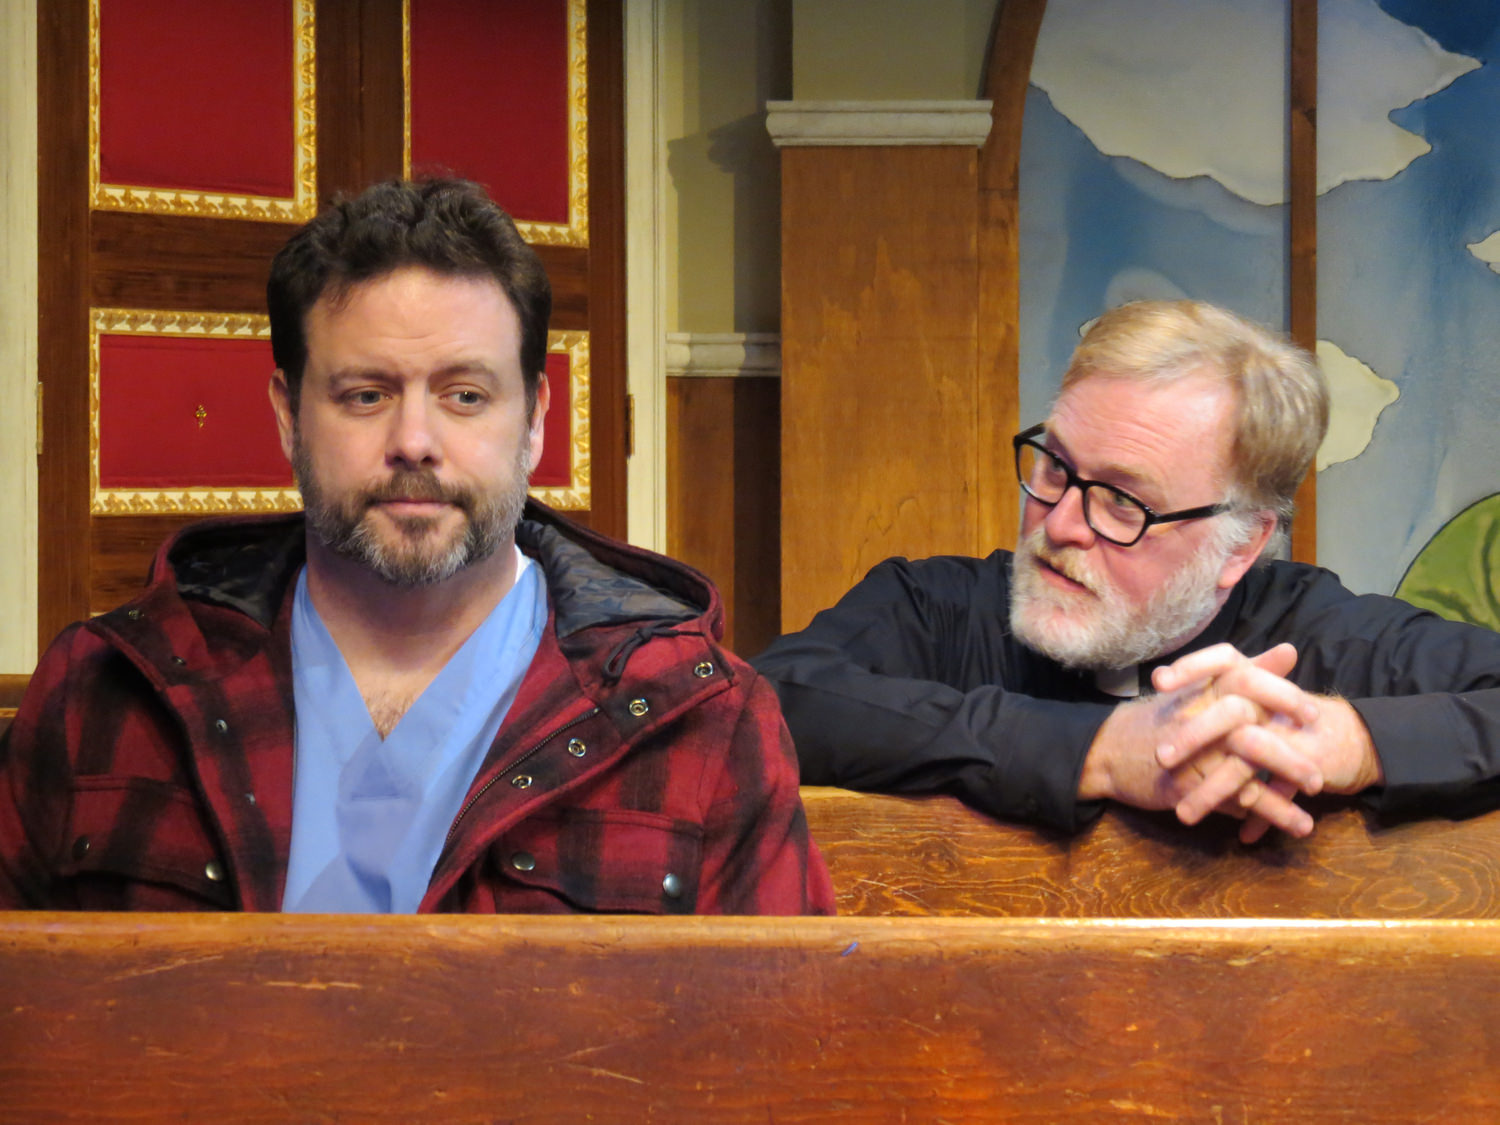 Jared Michael Delaney (L) as Carl and Ames Adamson as Father Dan in Joel Stone's edge-of-the-pew thriller THE CALLING at NJ Rep. (photo: SuzAnne Barabas)